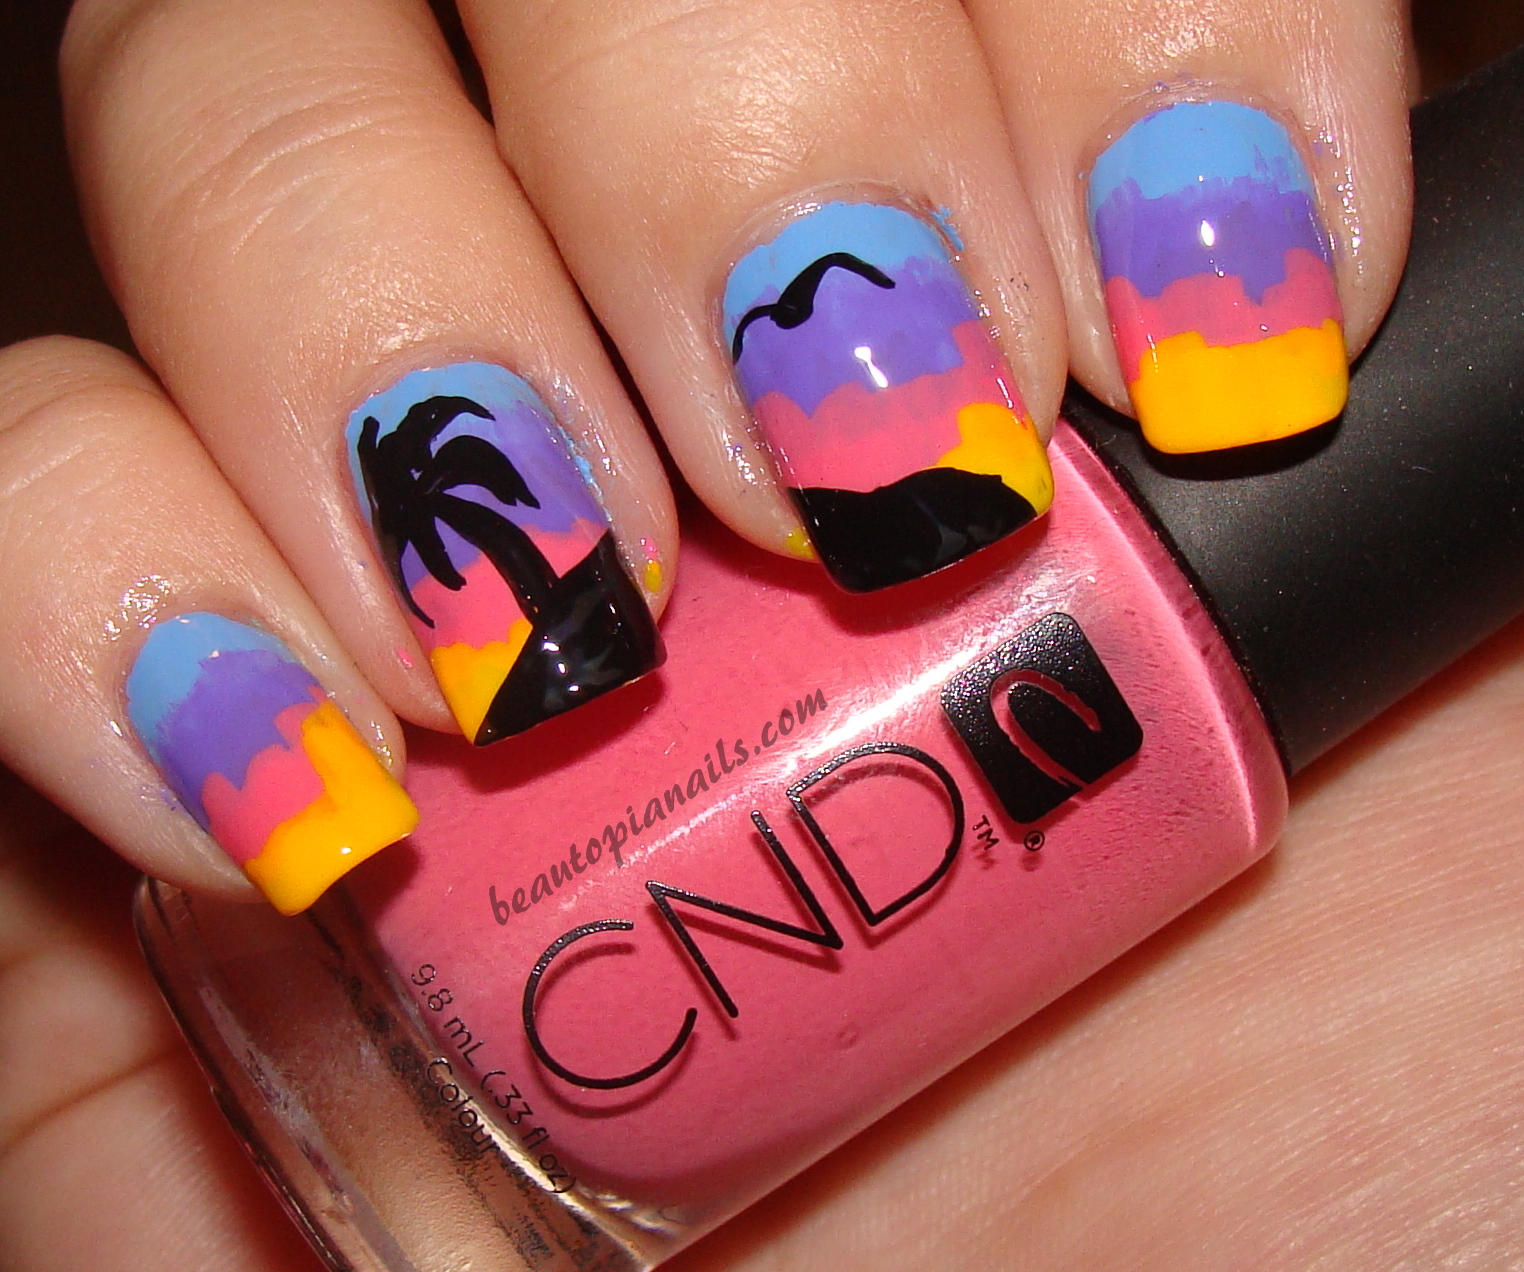 20+Awesome Sunset Nail Design Ideas | WeLoveStyles.com